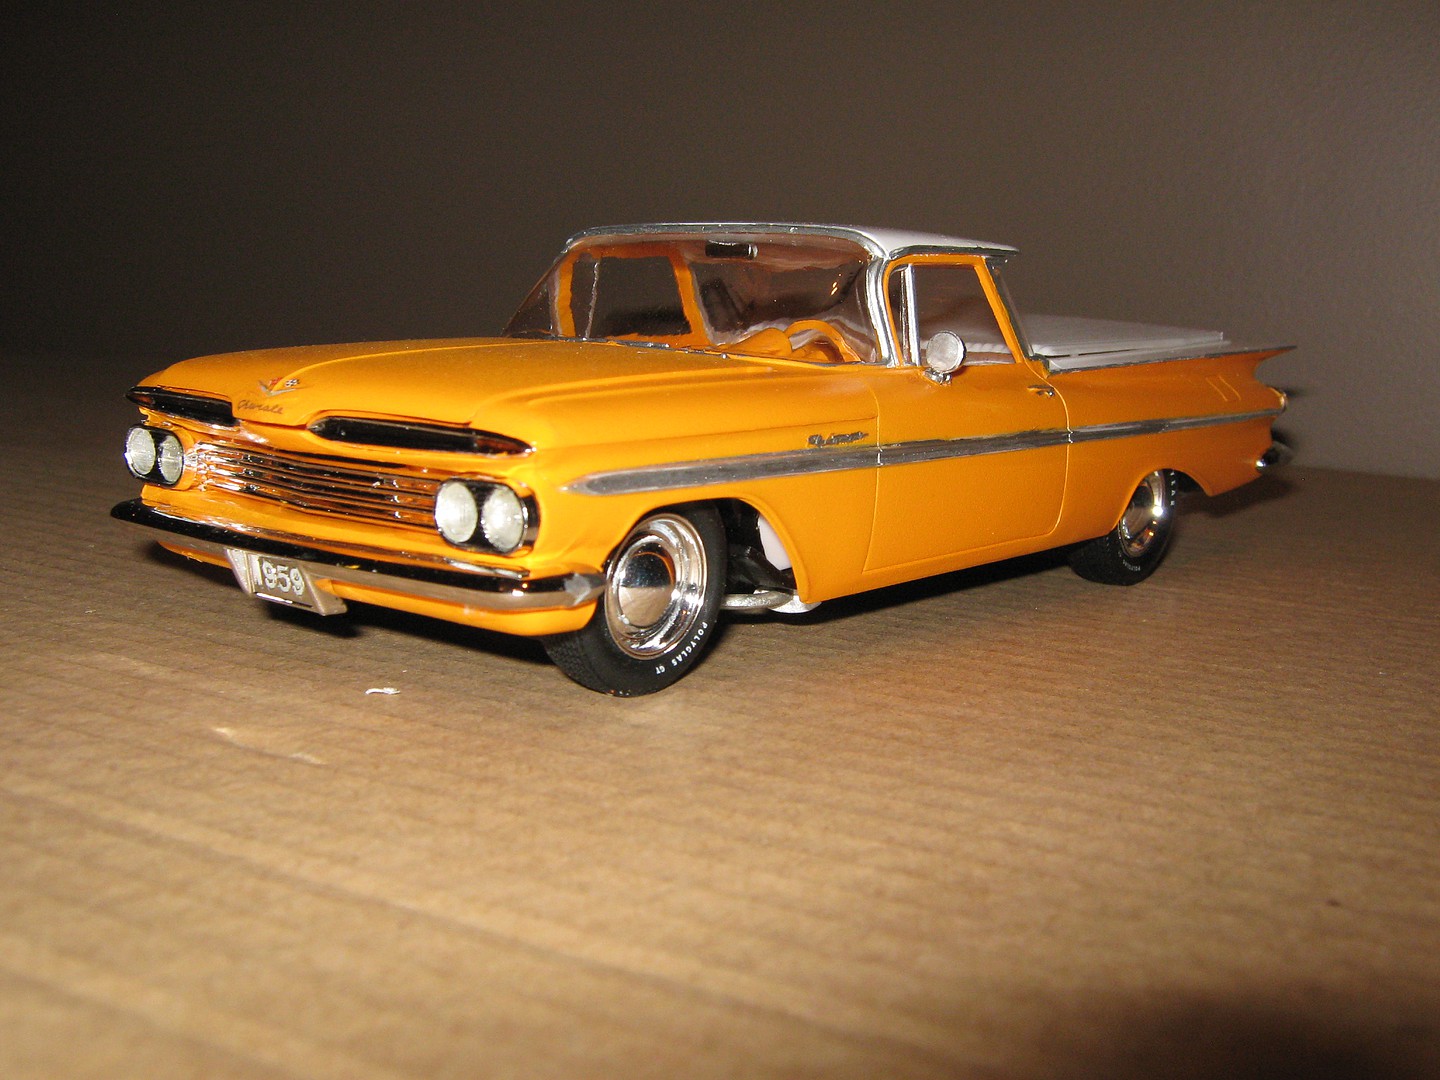 AMT 1/25 Chevy El Camino Street Rods 1959 Amt1058 for sale online 